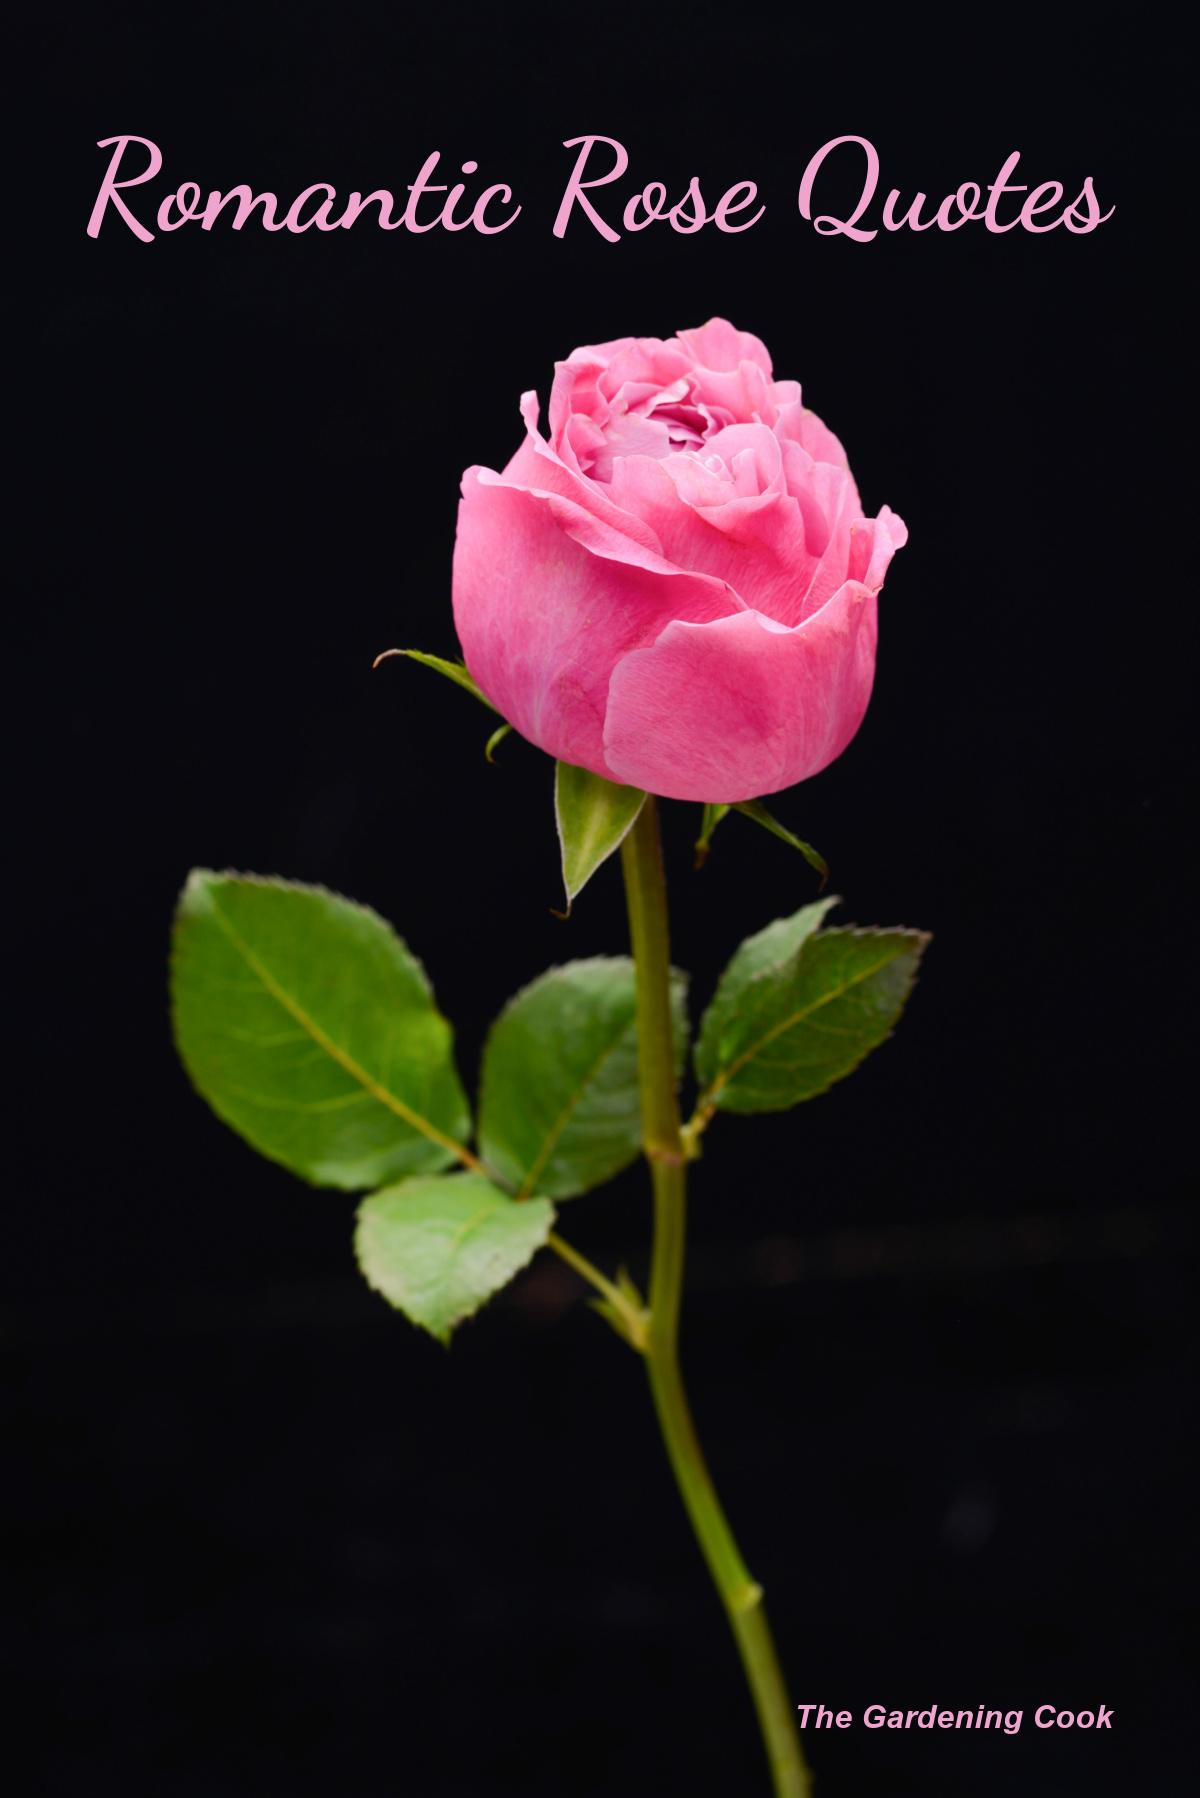 Pink rose bud on a black background with words "Romantic Rose Quotes."